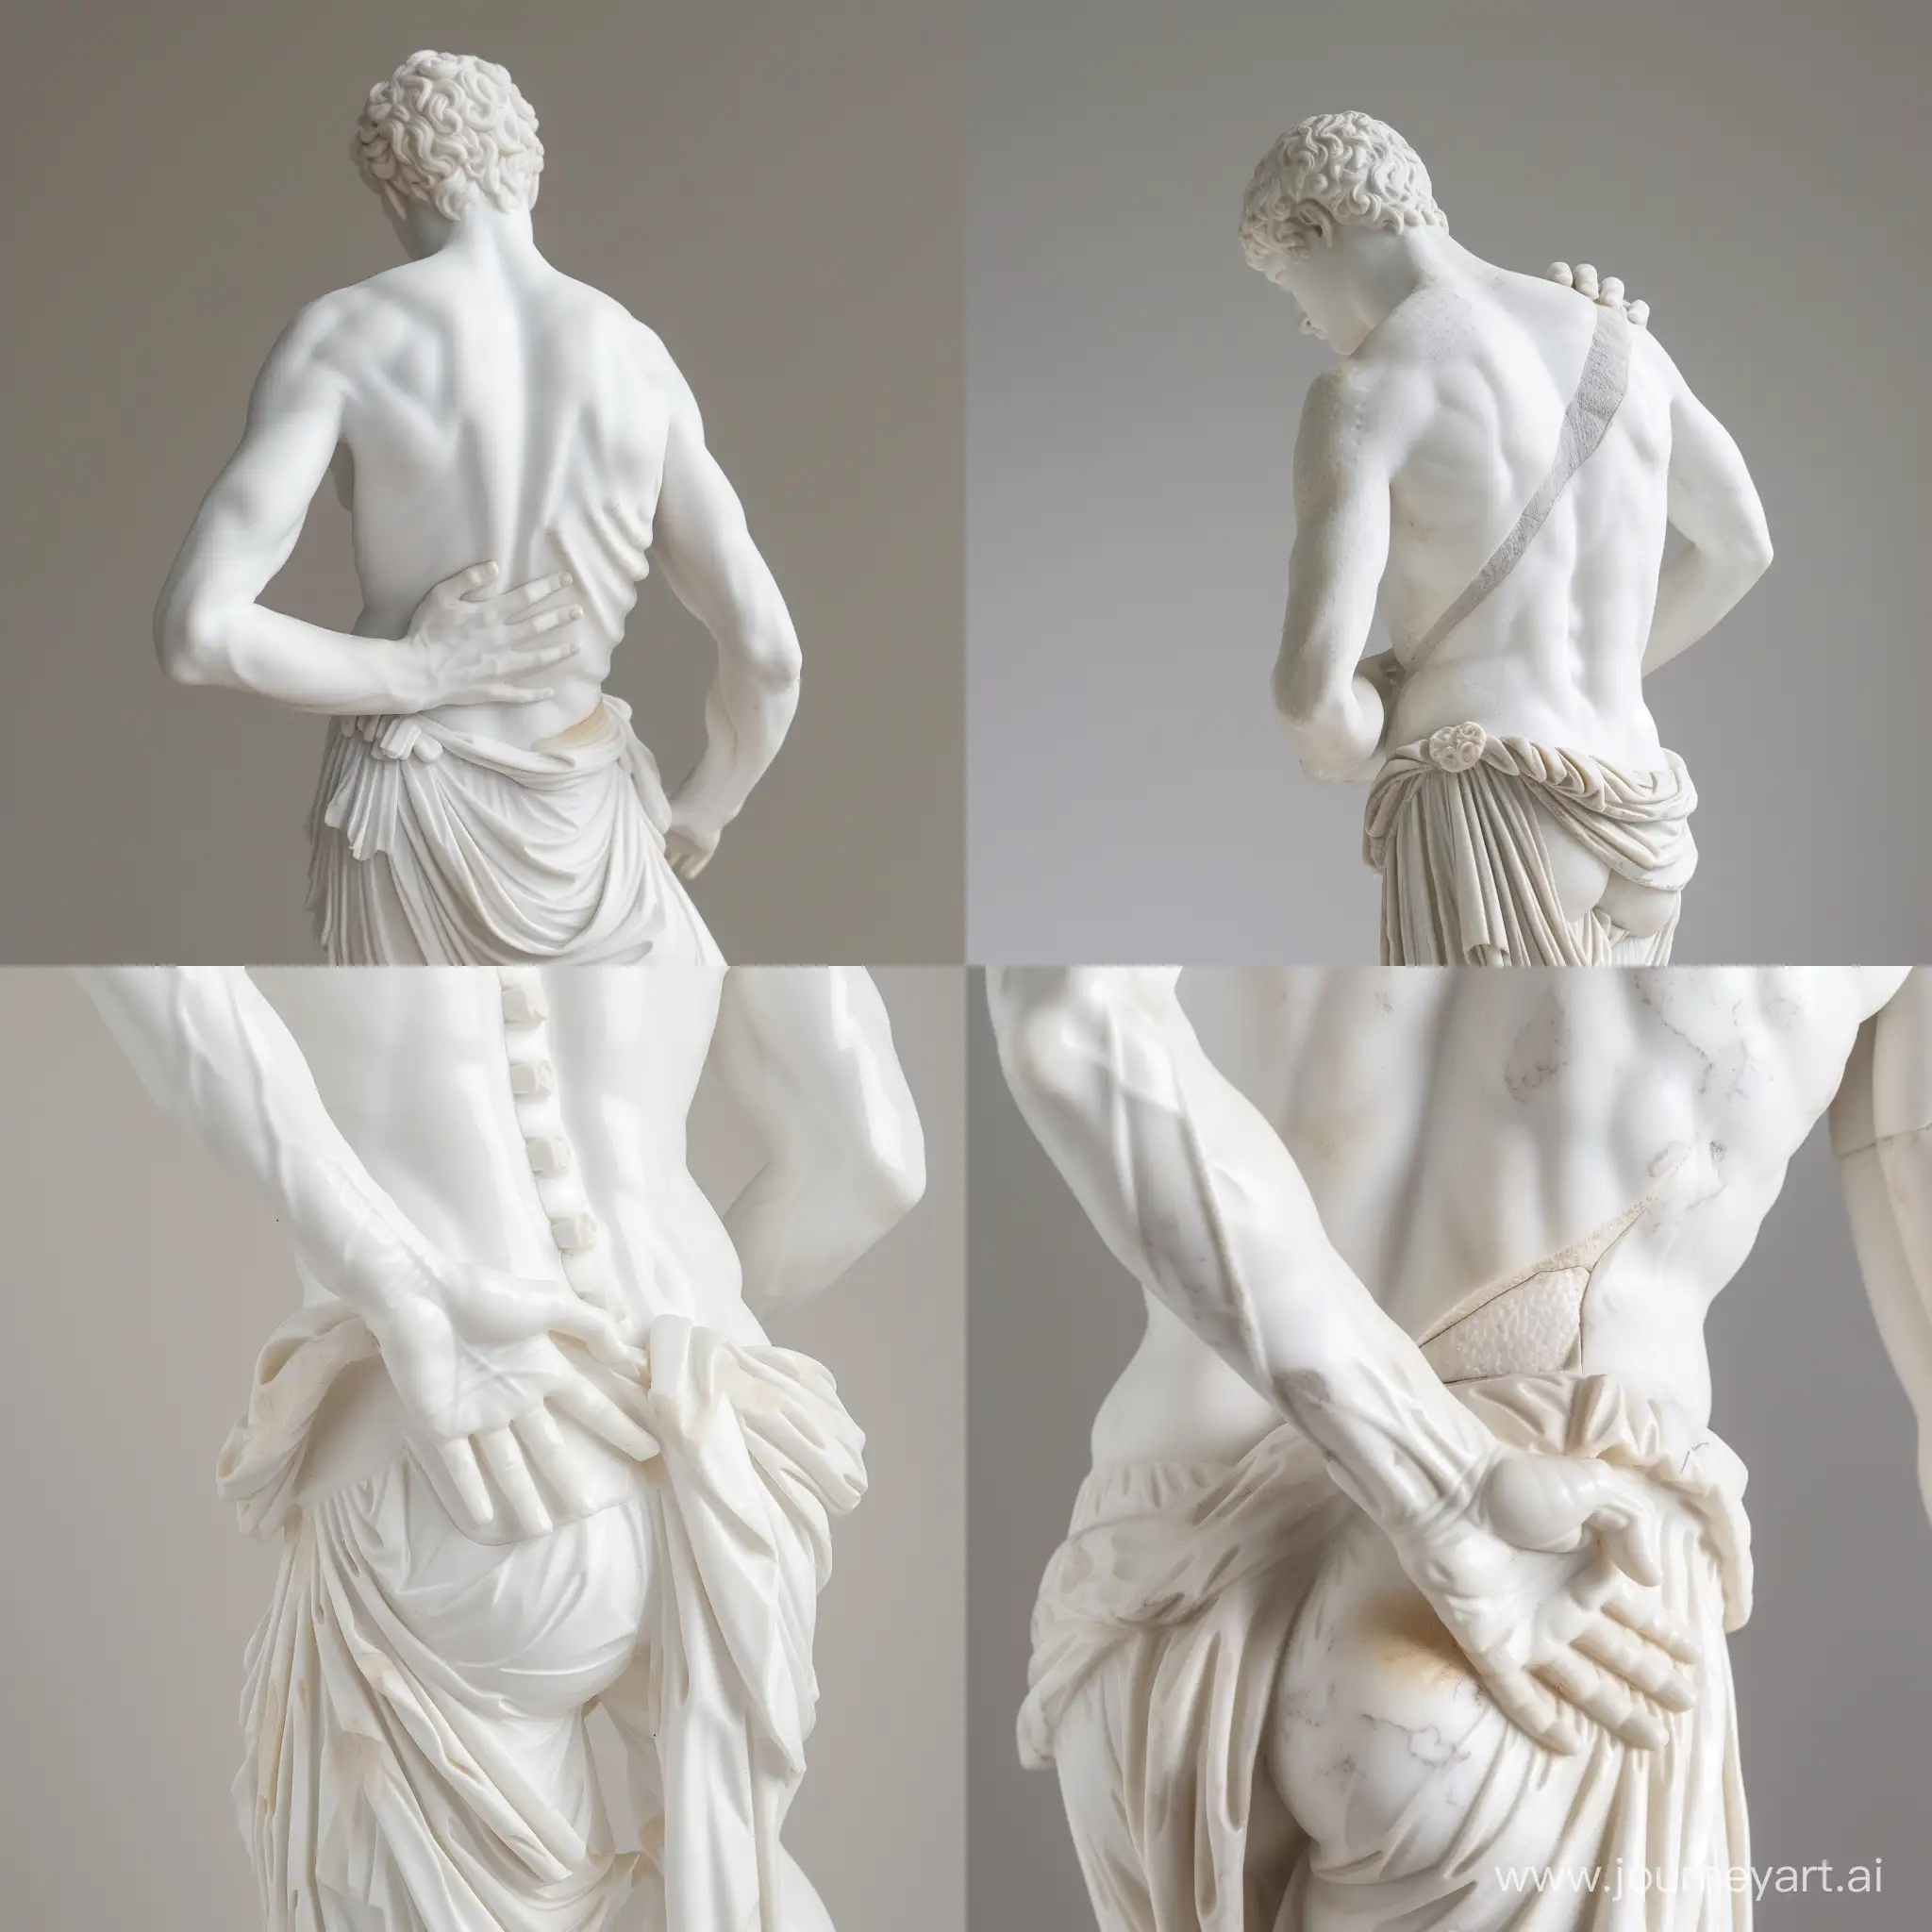 white Greek sculpture with back pain, holding his hand on the lower back